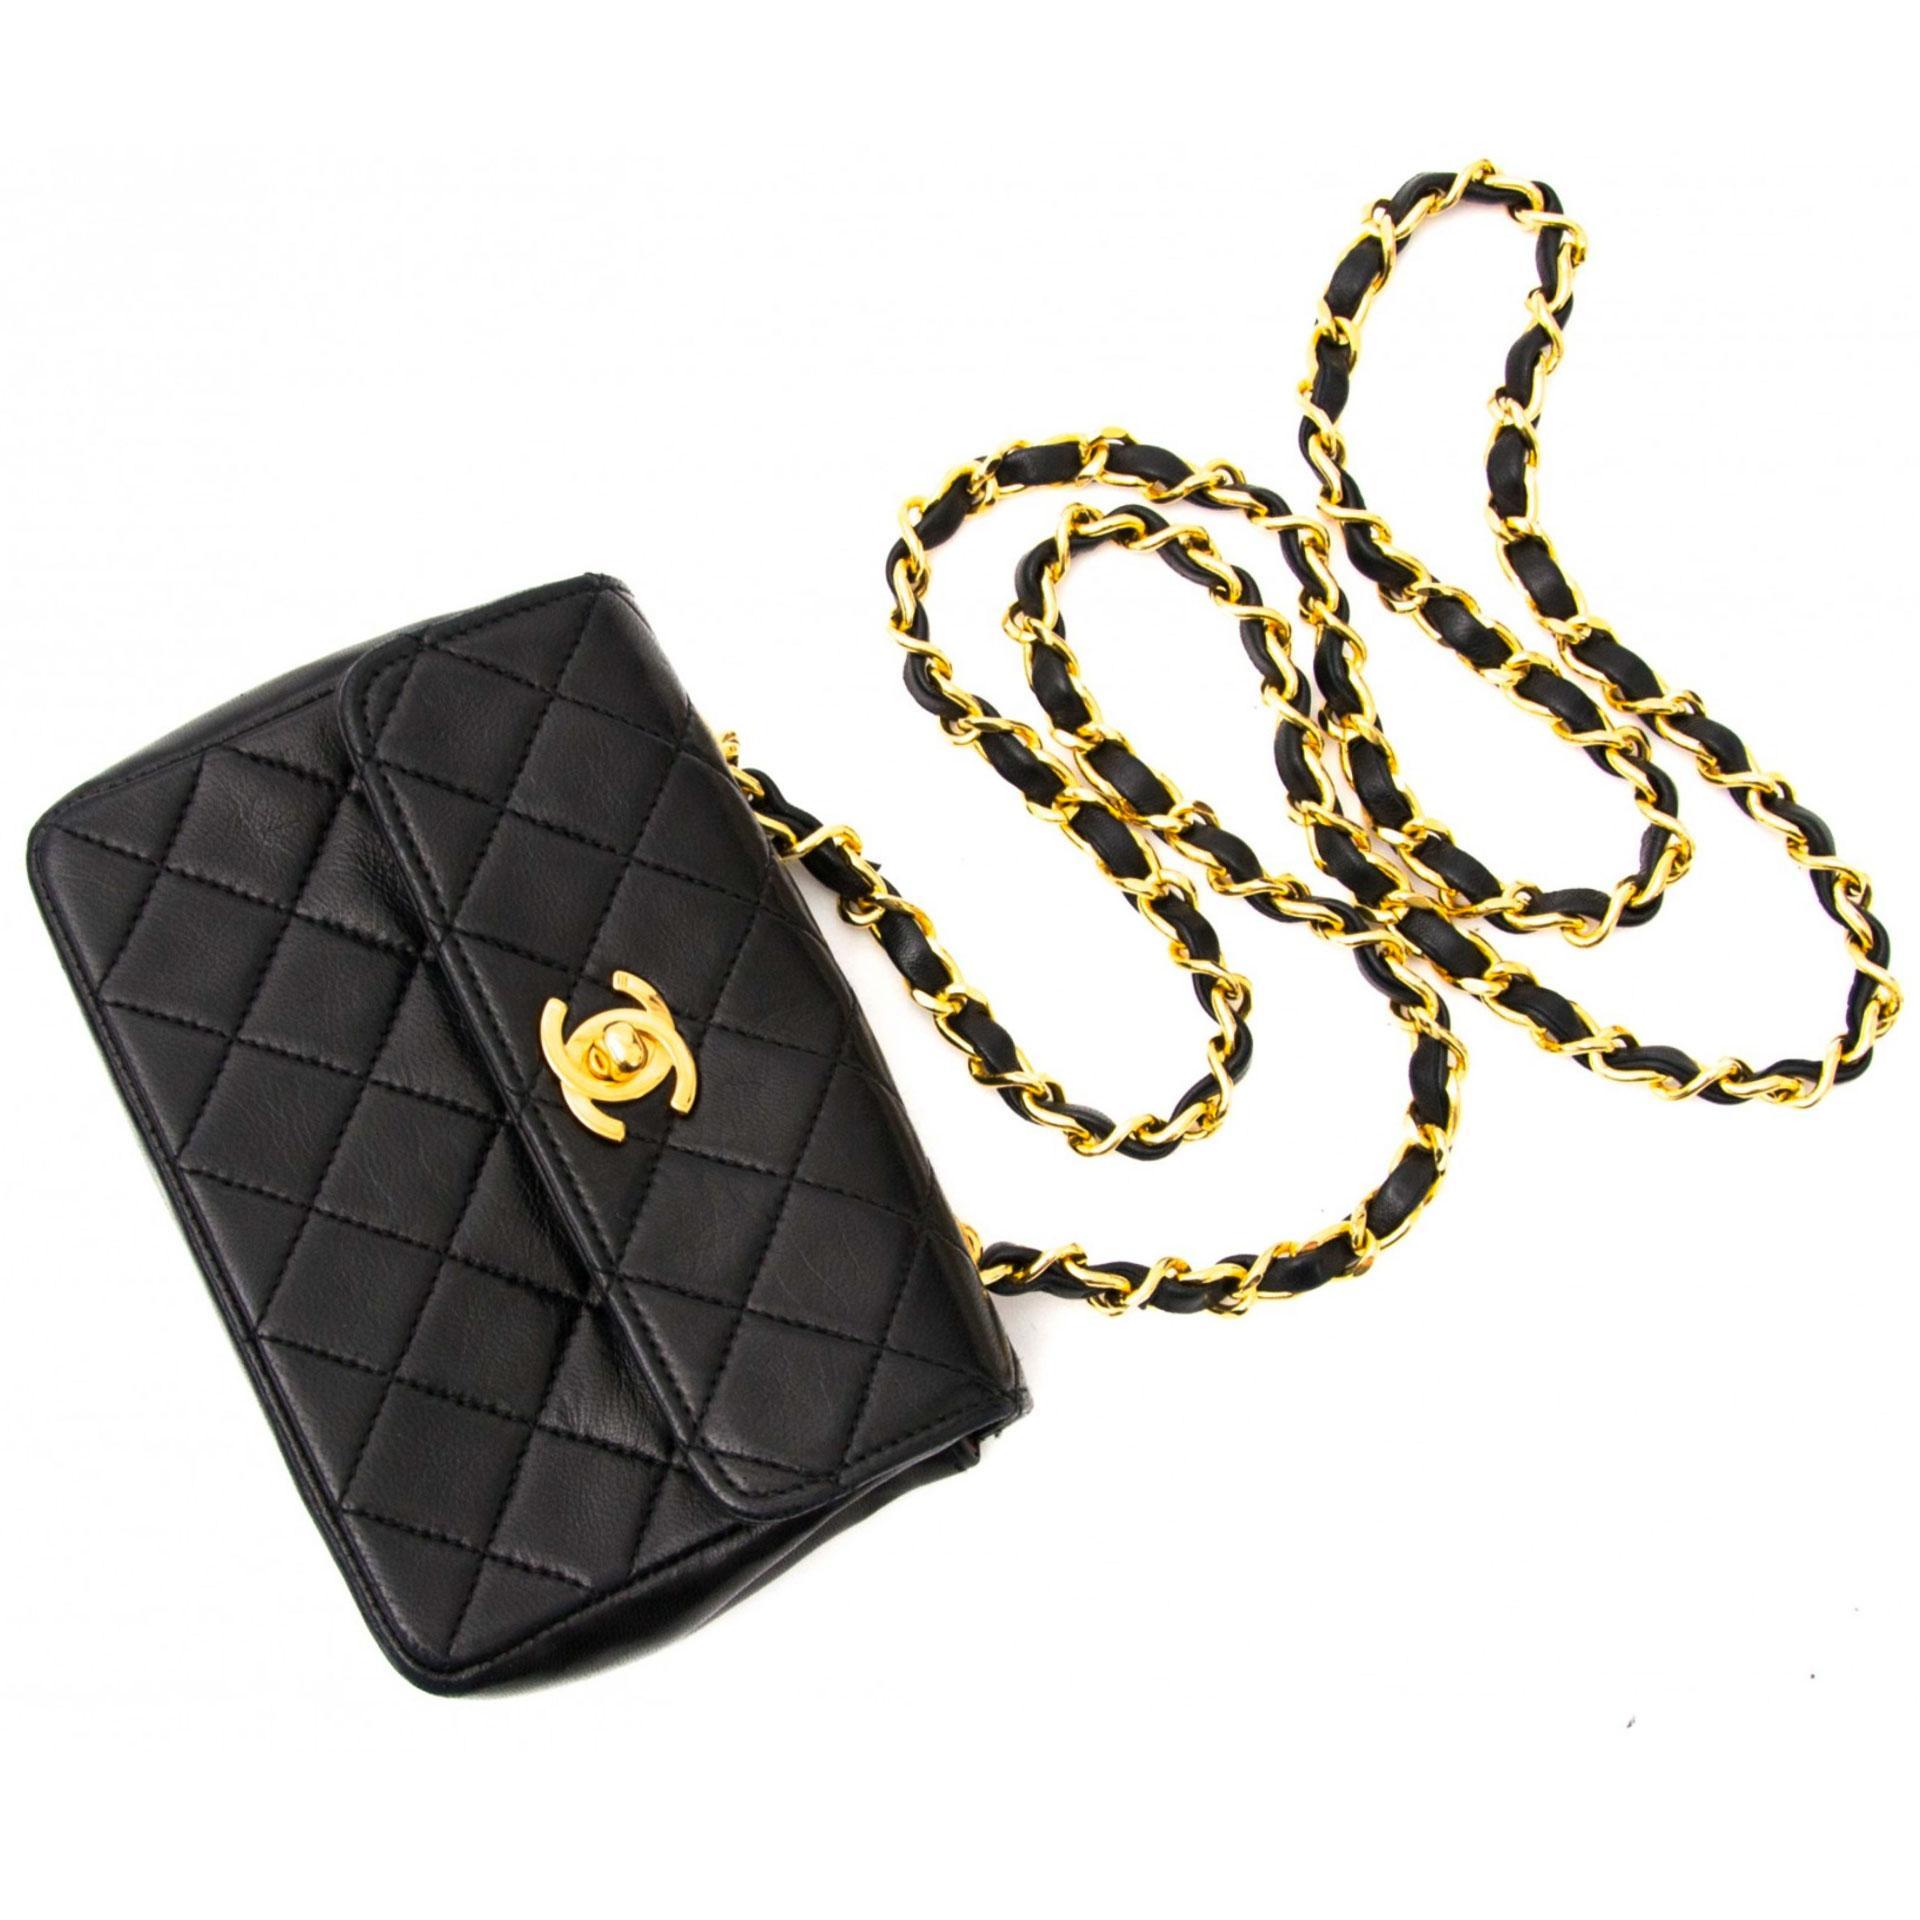 Chanel 1989 Mini Vintage Lambskin Crossbody Classic Flap Bag In Good Condition For Sale In Miami, FL